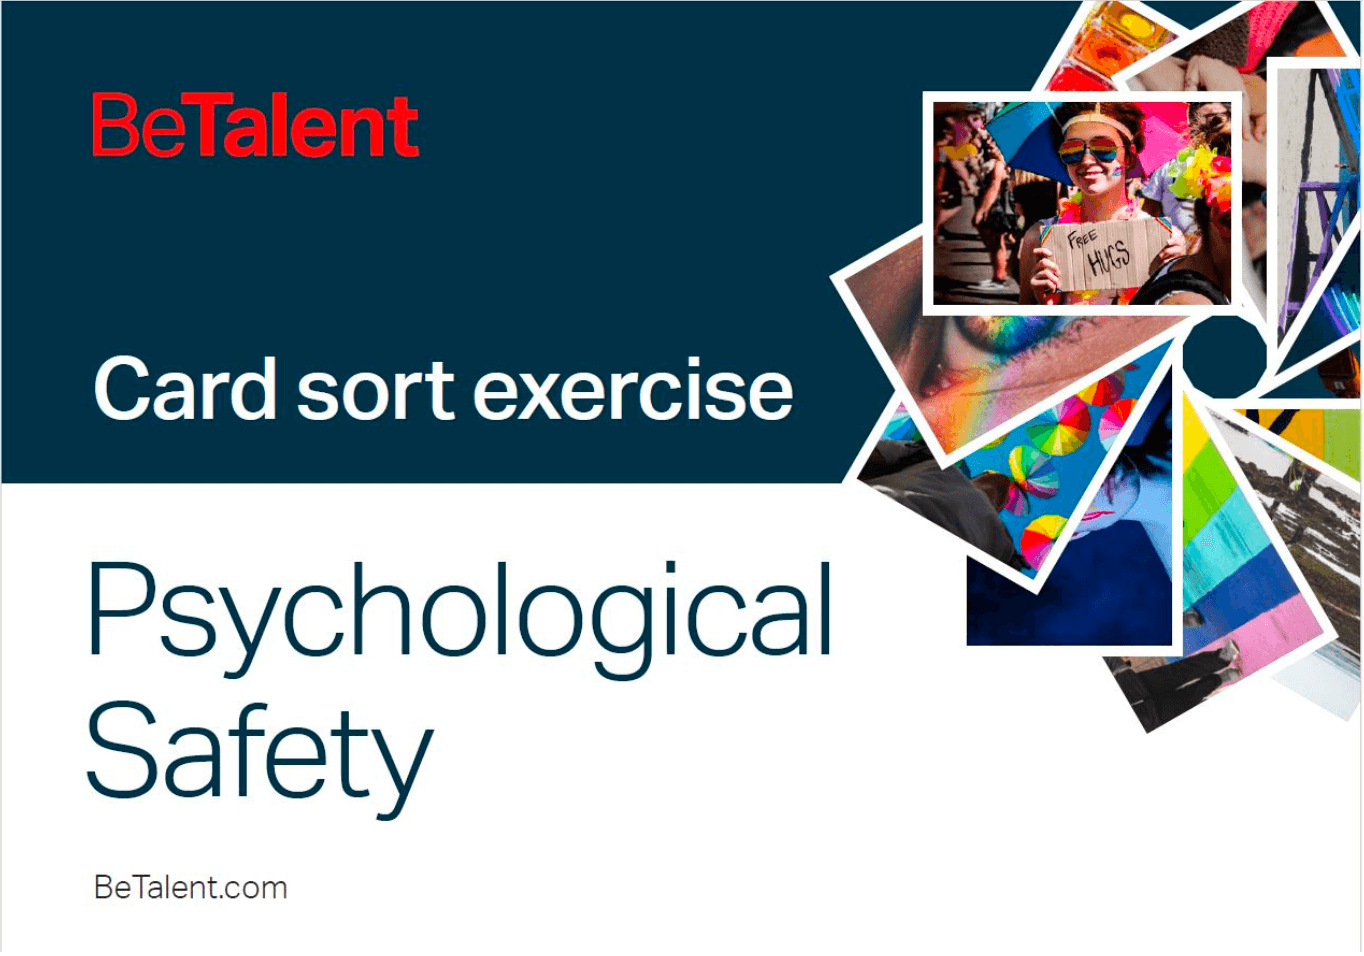 Boost Communication, Trust and Performance with Improved Psychological Safety